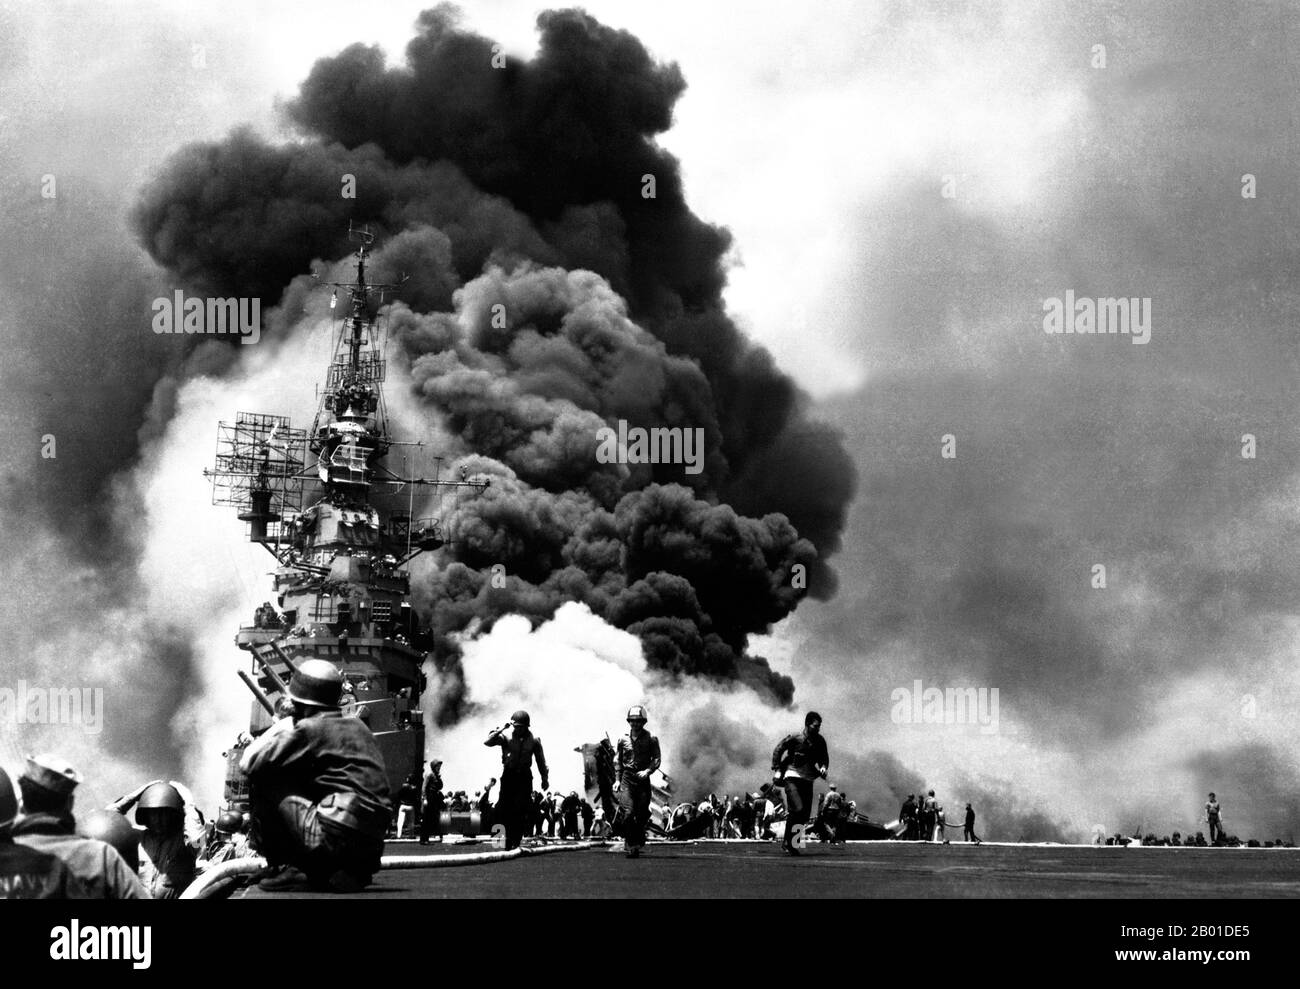 USA/Japan: The USS Bunker Hill hit by two Japanese kamikaze aircraft off Kyushu, 11 May, 1945.  Kamikaze ('divine wind') were suicide attacks by military aviators from the Empire of Japan against Allied naval vessels in the closing stages of the Pacific campaign of World War II, designed to destroy as many warships as possible.  Kamikaze pilots would attempt to crash their aircraft into enemy ships in planes laden with explosives, bombs, torpedoes and full fuel tanks. The aircraft's normal functions (to deliver torpedoes or bombs or shoot down other aircraft) were put aside. Stock Photo